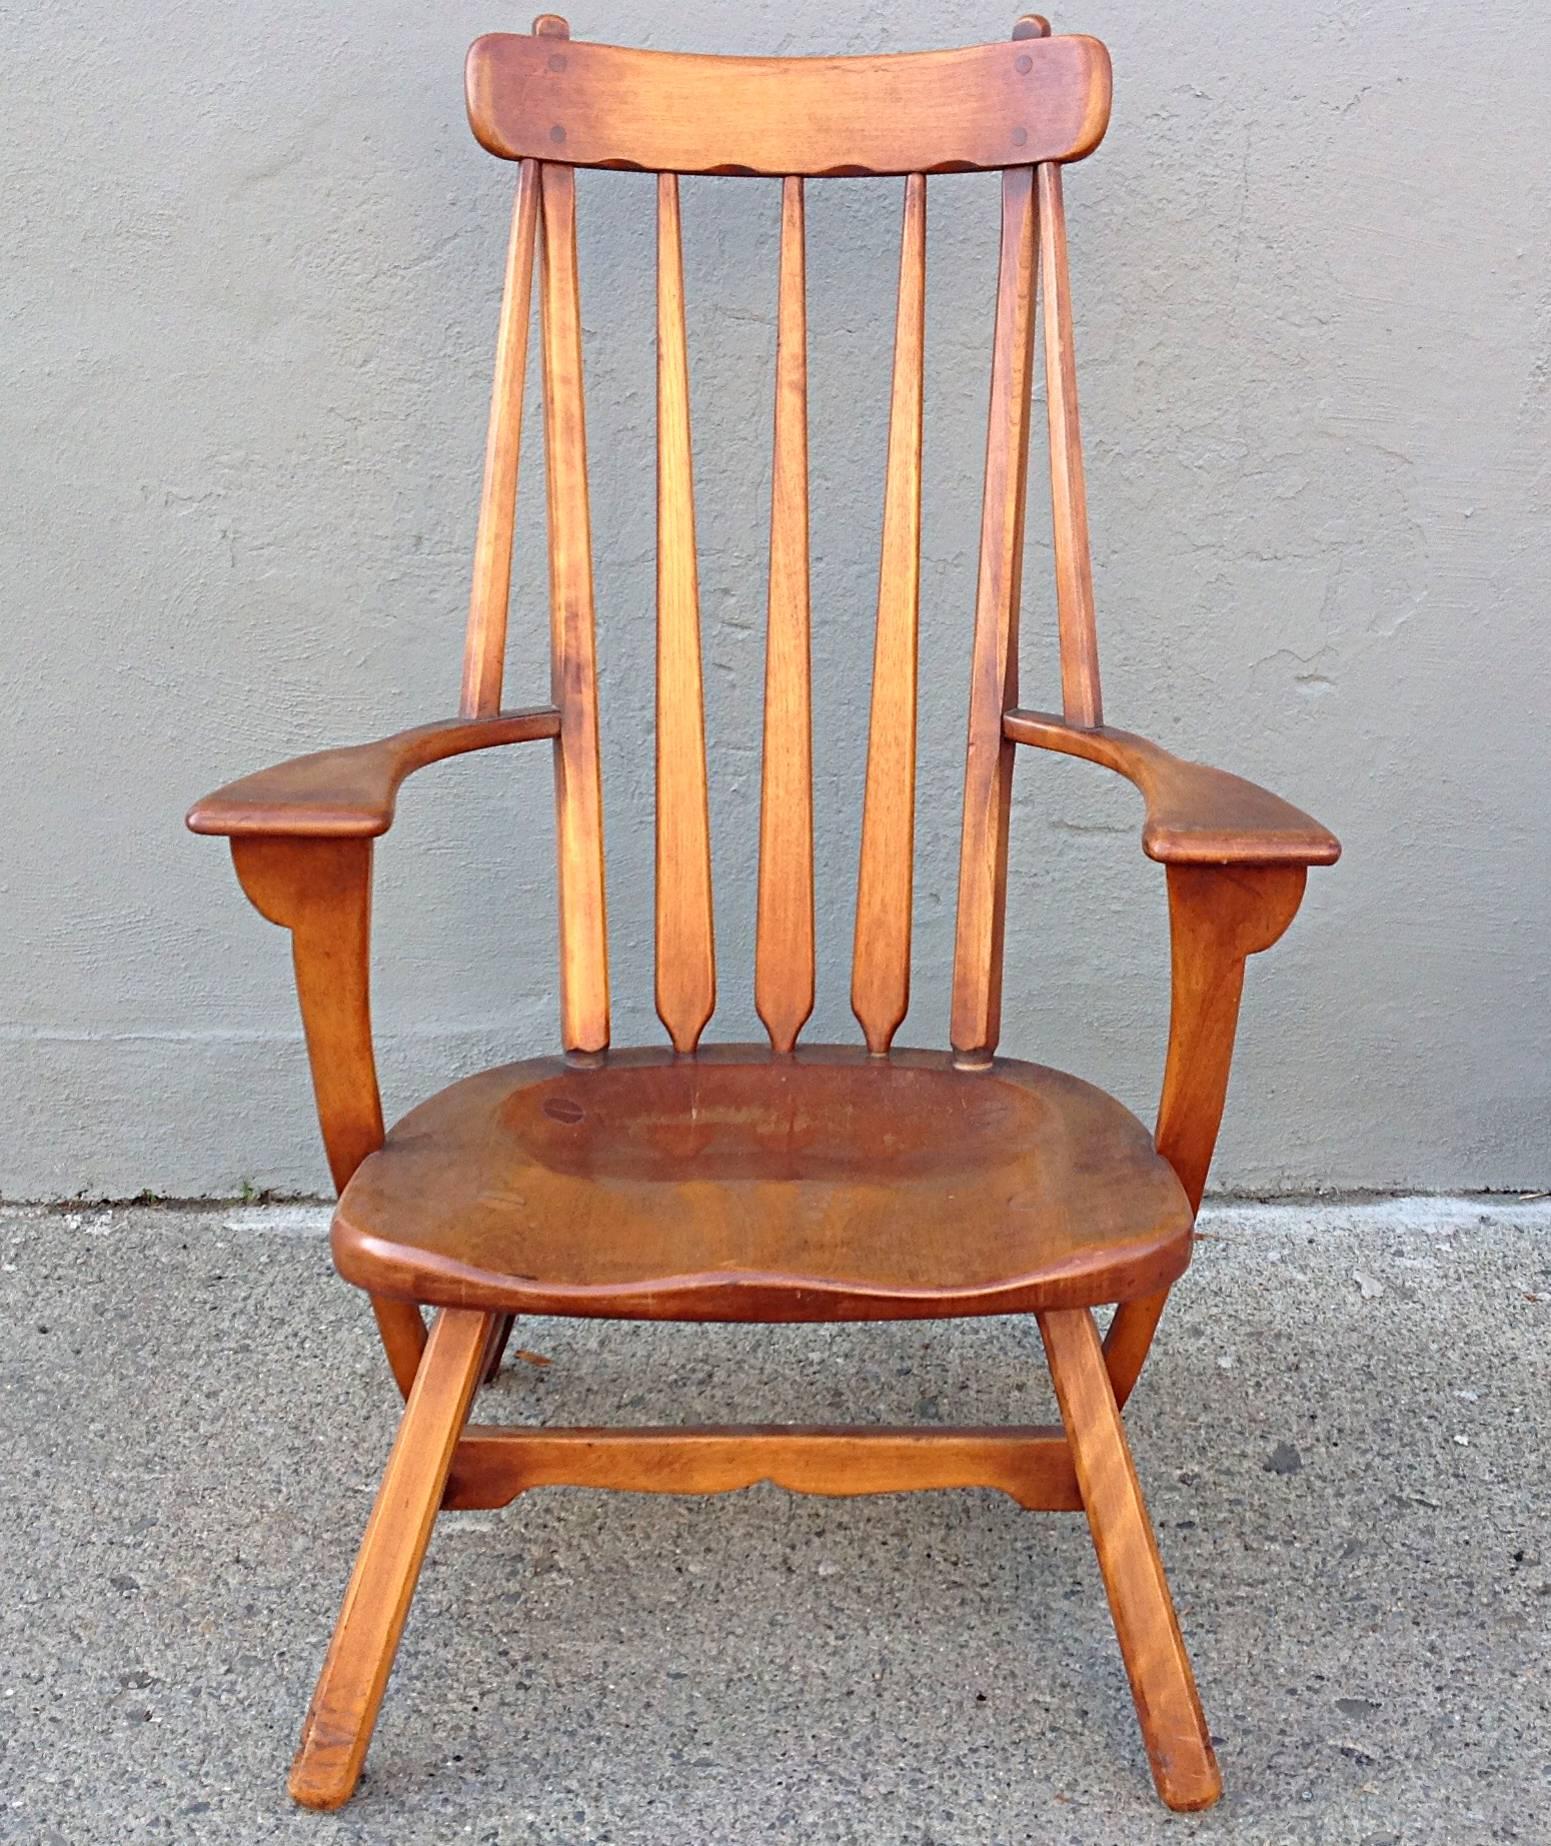 Solid maple armchair with saddle shaped seat, wide paddle arms and arrow spindle back. Similar to the Cushman designs of the 1930s this example was crafted by Sykes Furniture also mid-1930s. Retains its original finish with rich patina and age